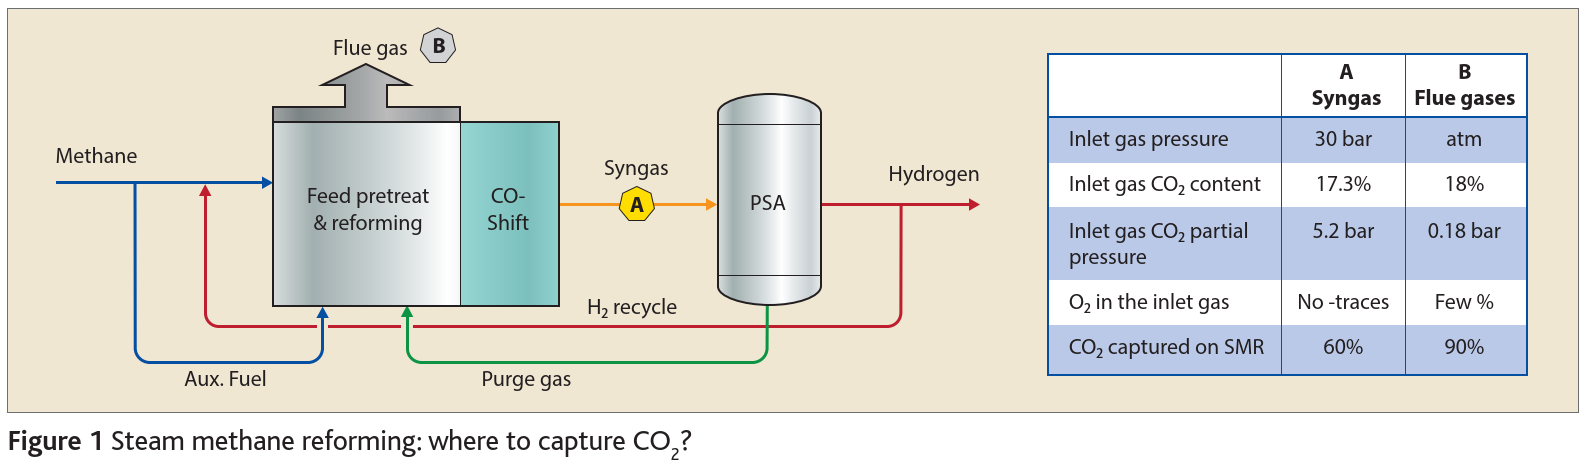 Steam Methane Reforming: where to capture CO2